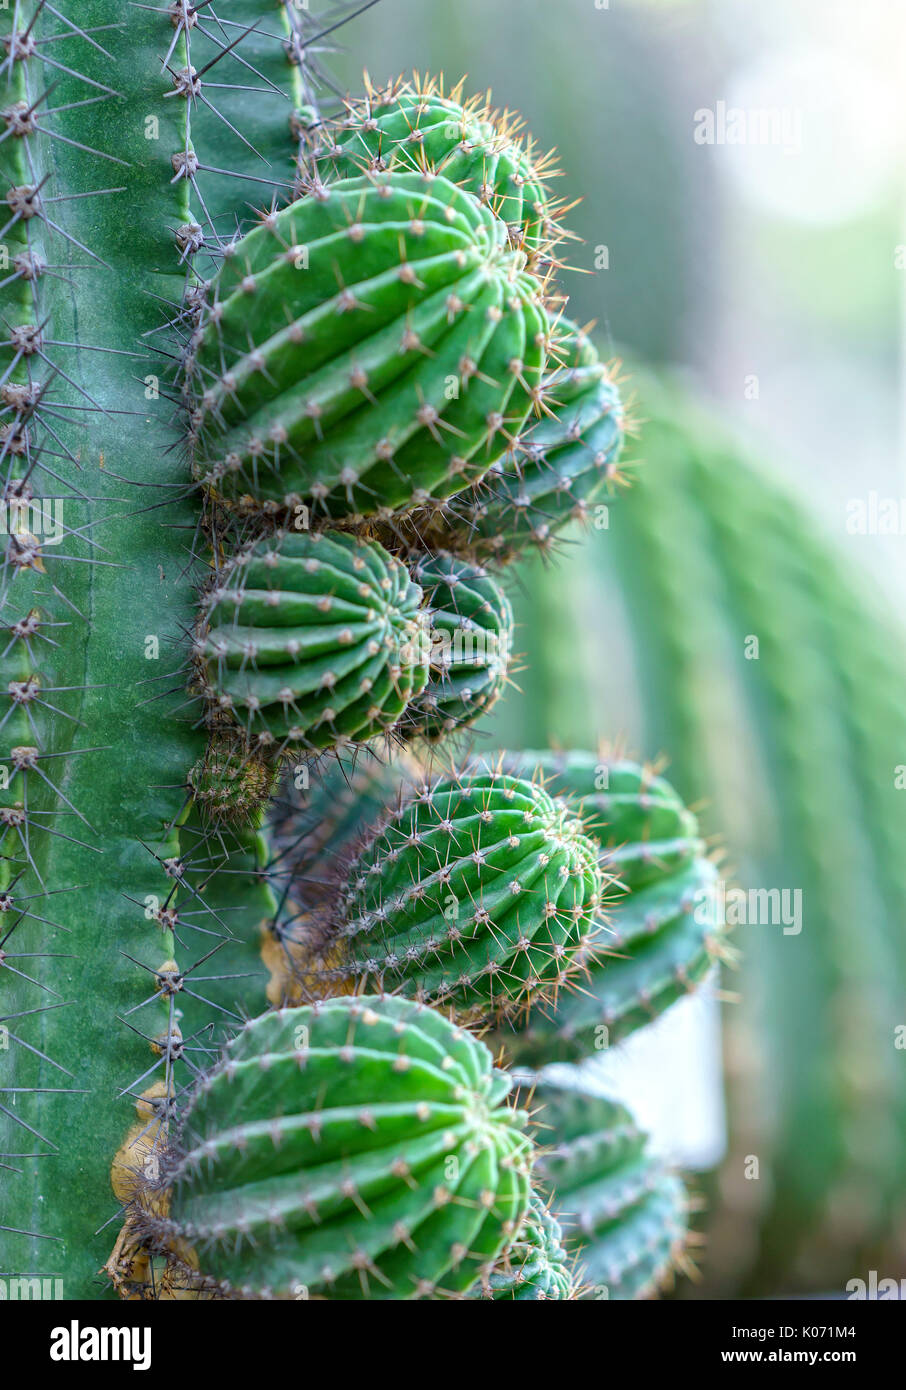 Cactus growing in the natural world, it is drought resistant plants well under extreme energy represents human suffering before the rigors of nature Stock Photo